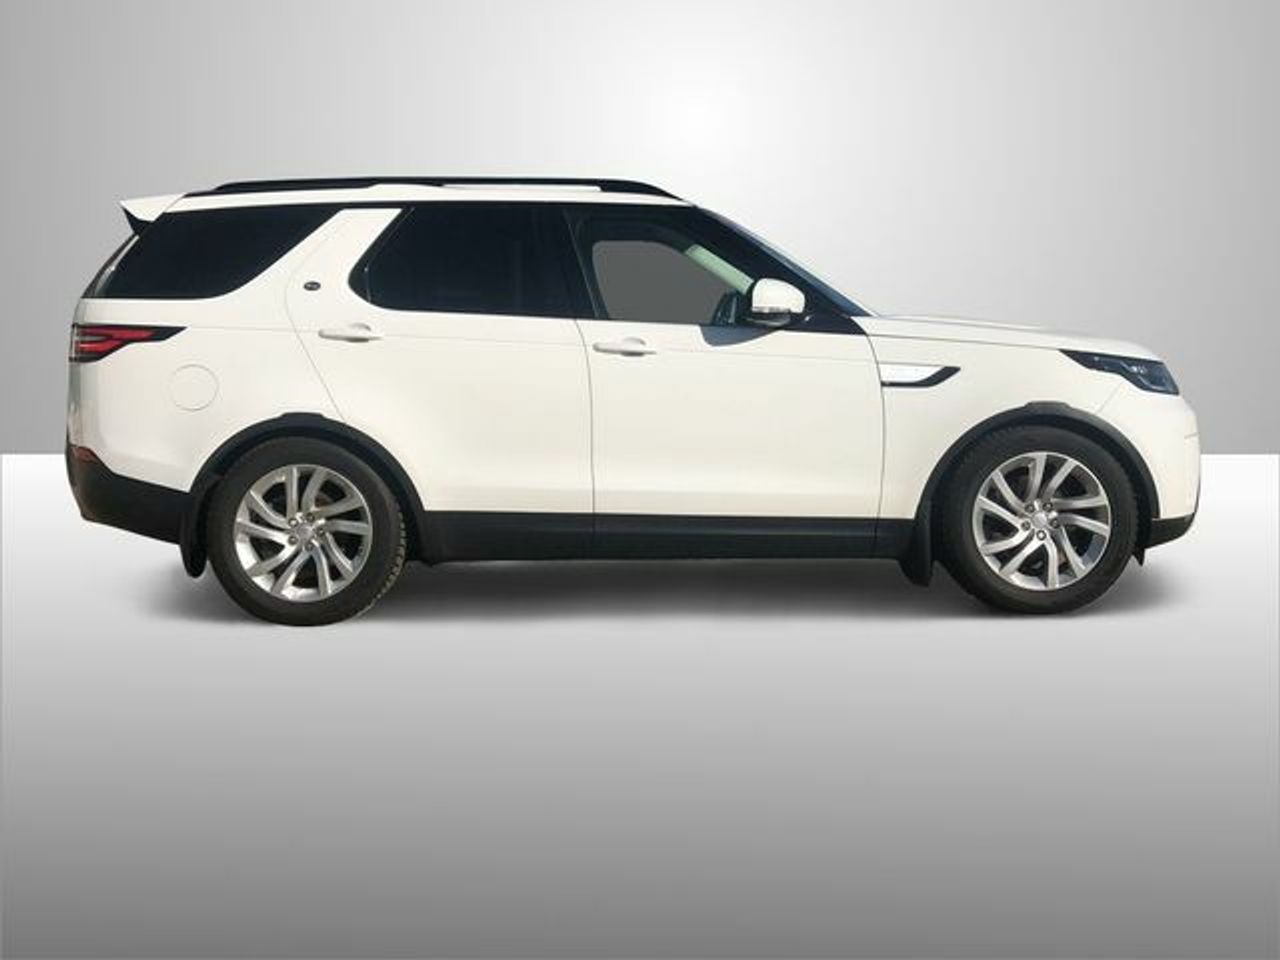 Foto Land-Rover Discovery 6